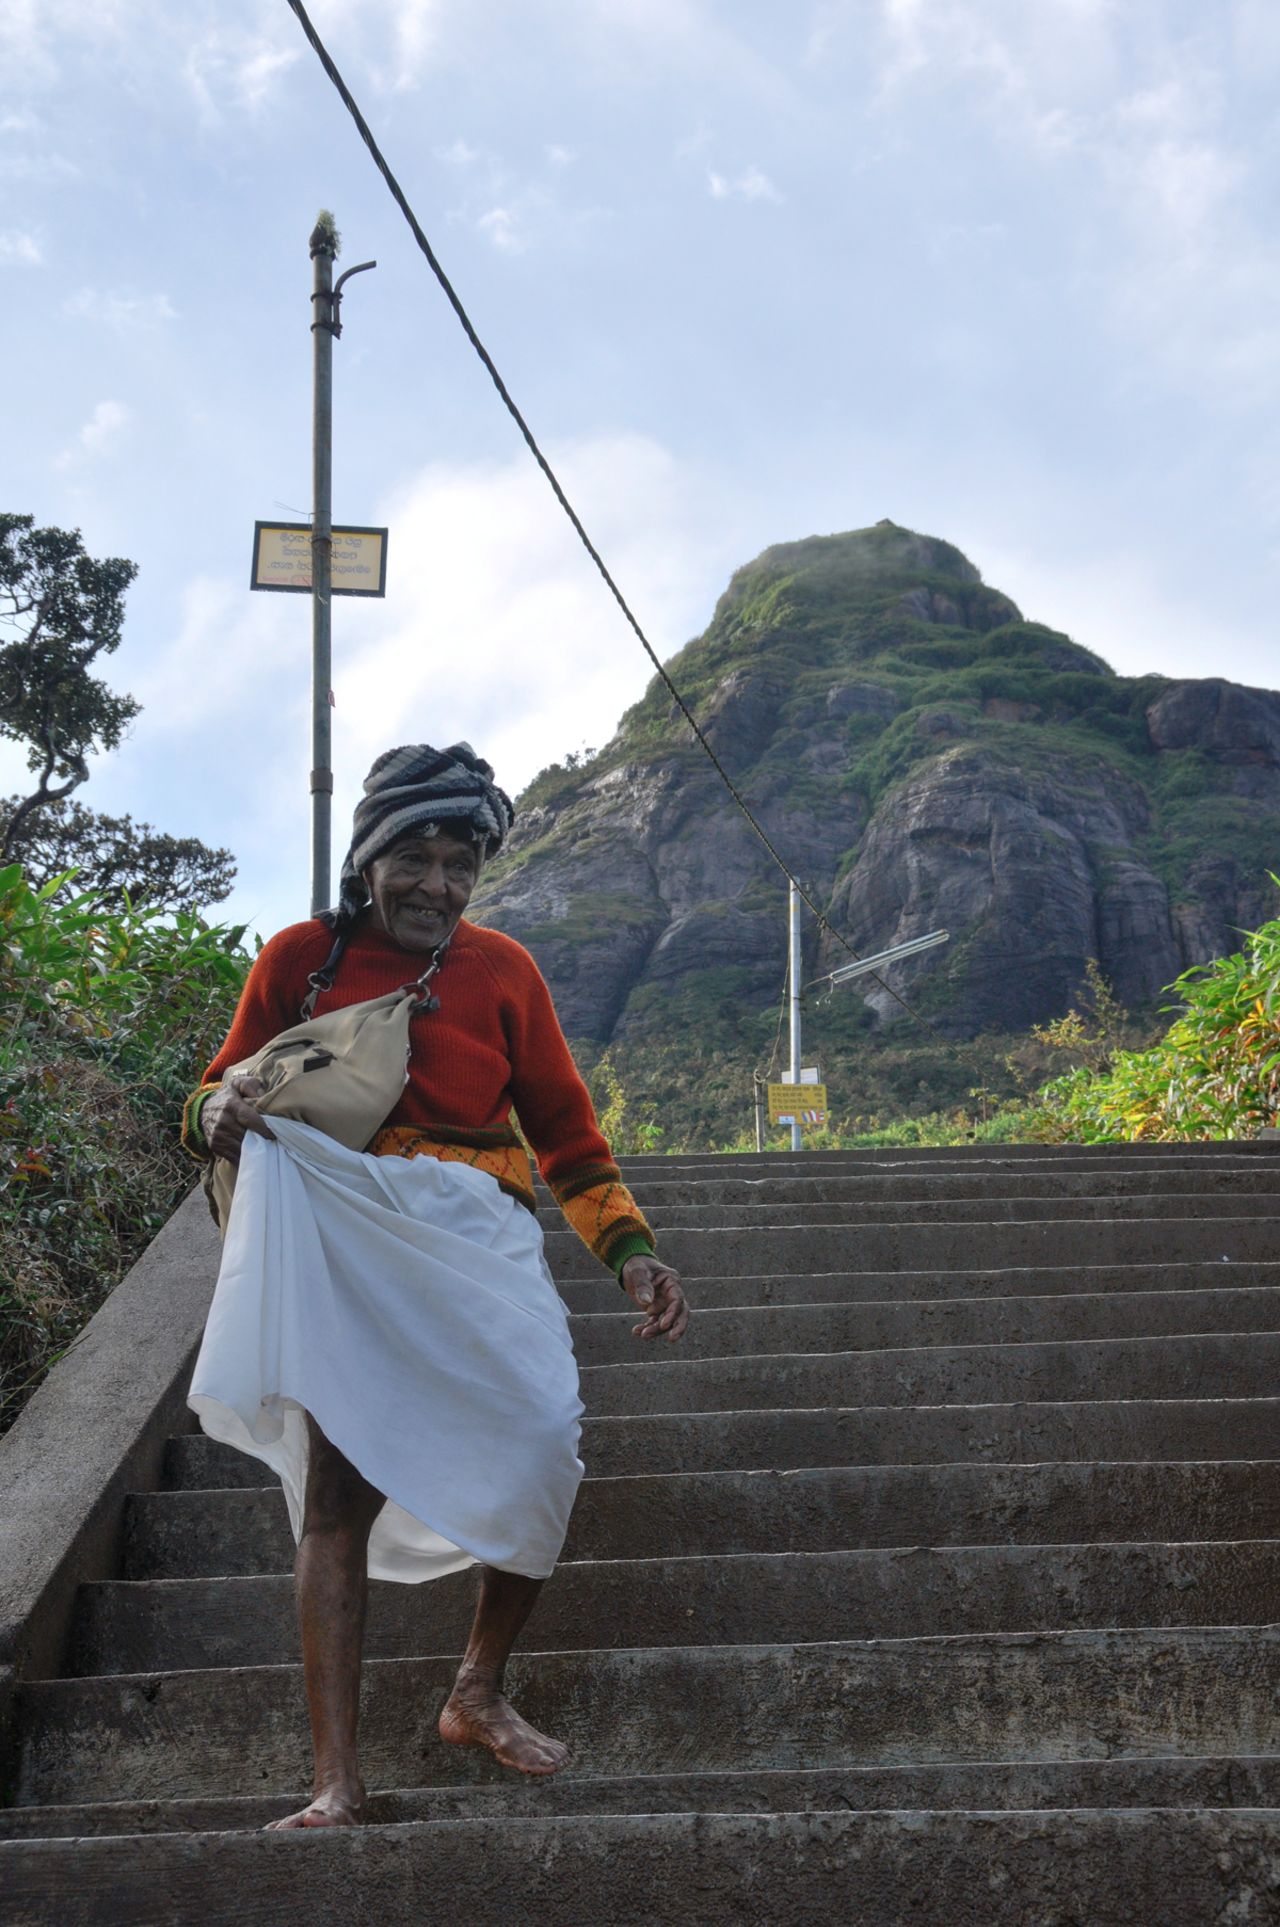 Many of the thousands of  pilgrims who daily flock to Adam's Peak tackle the route barefoot.